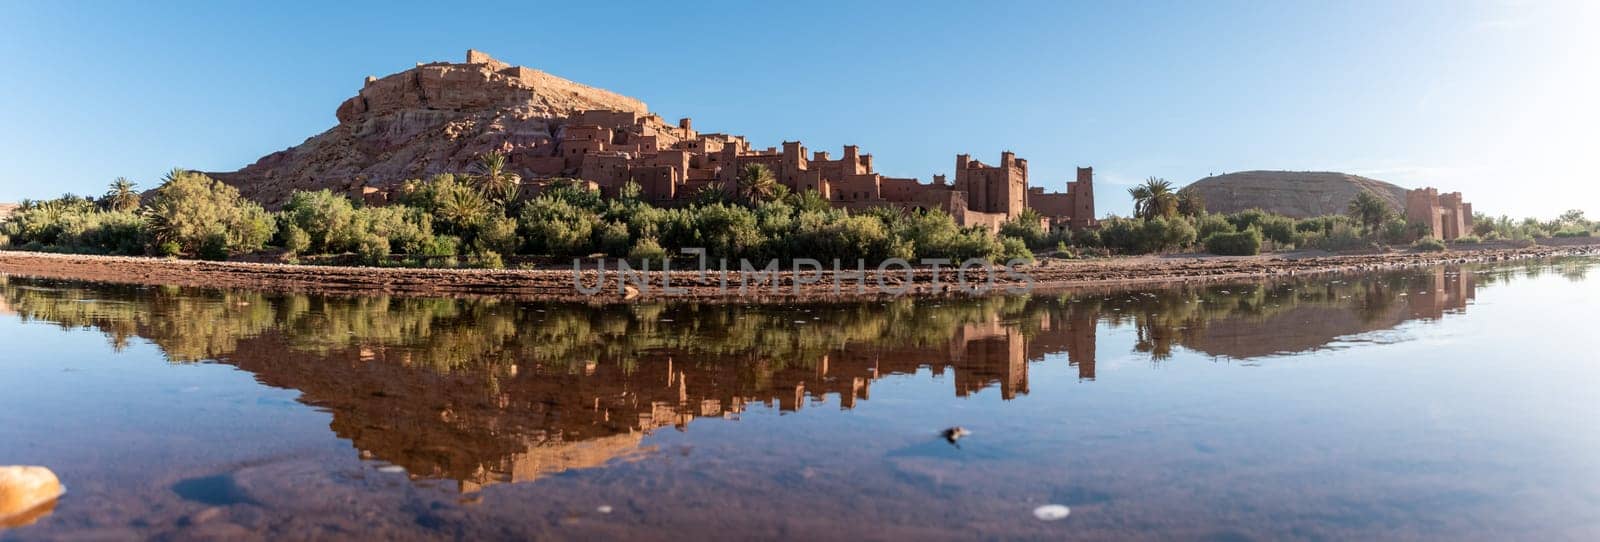 Sunrise over the beautiful historic town Ait Ben Haddou in Morocco, famous berber town with many kasbahs built of clay, UNESCO world heritage